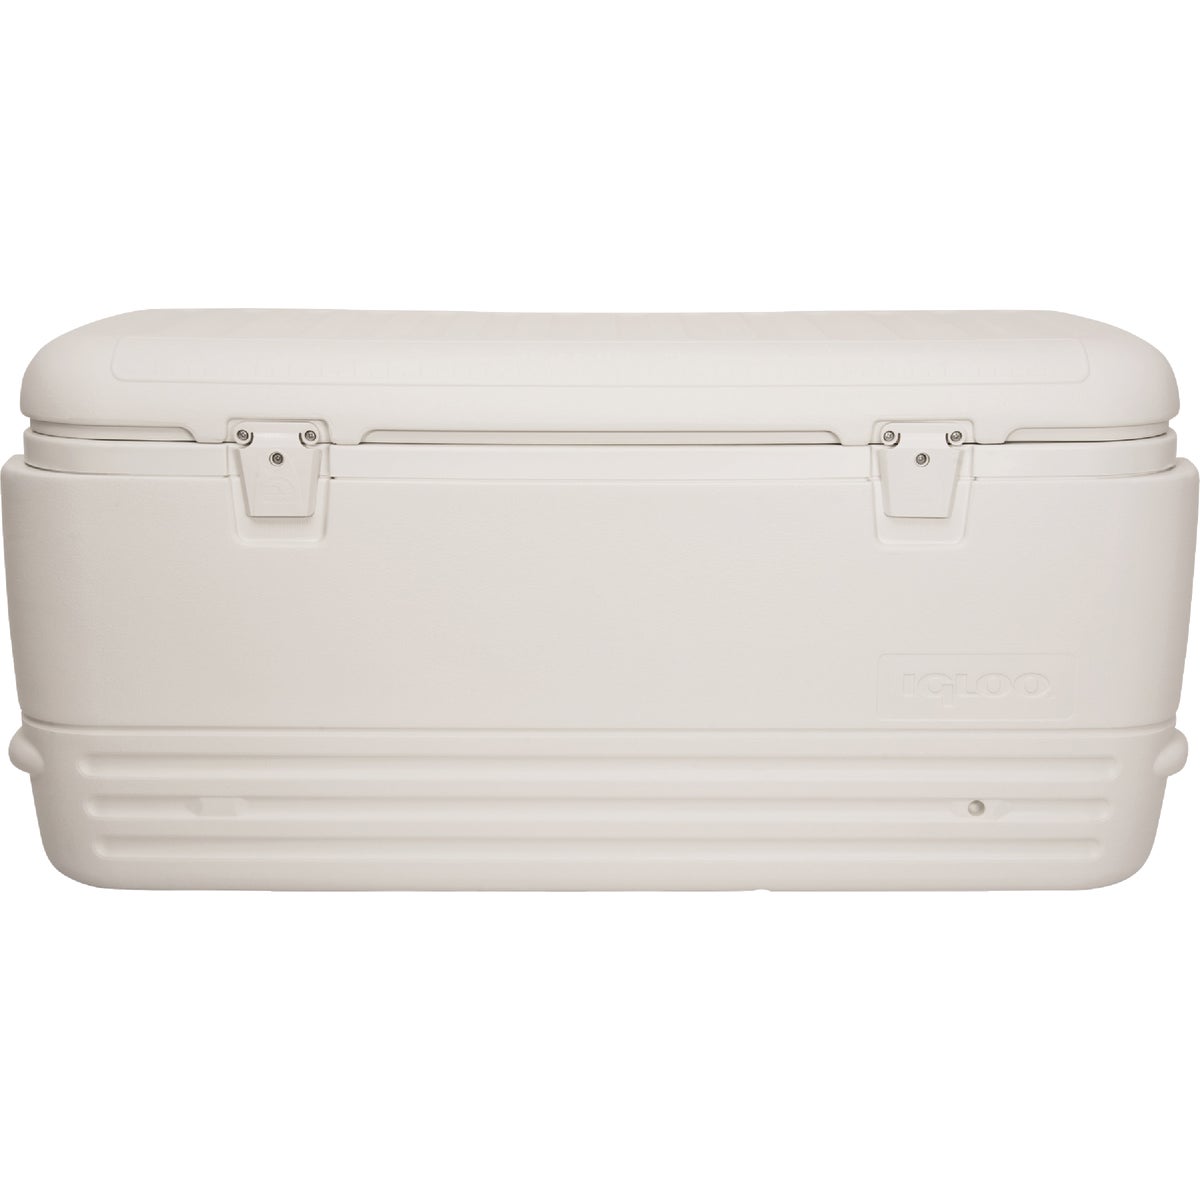 Item 826634, Durable polar cooler featuring an Ultratherm insulated body and lid.